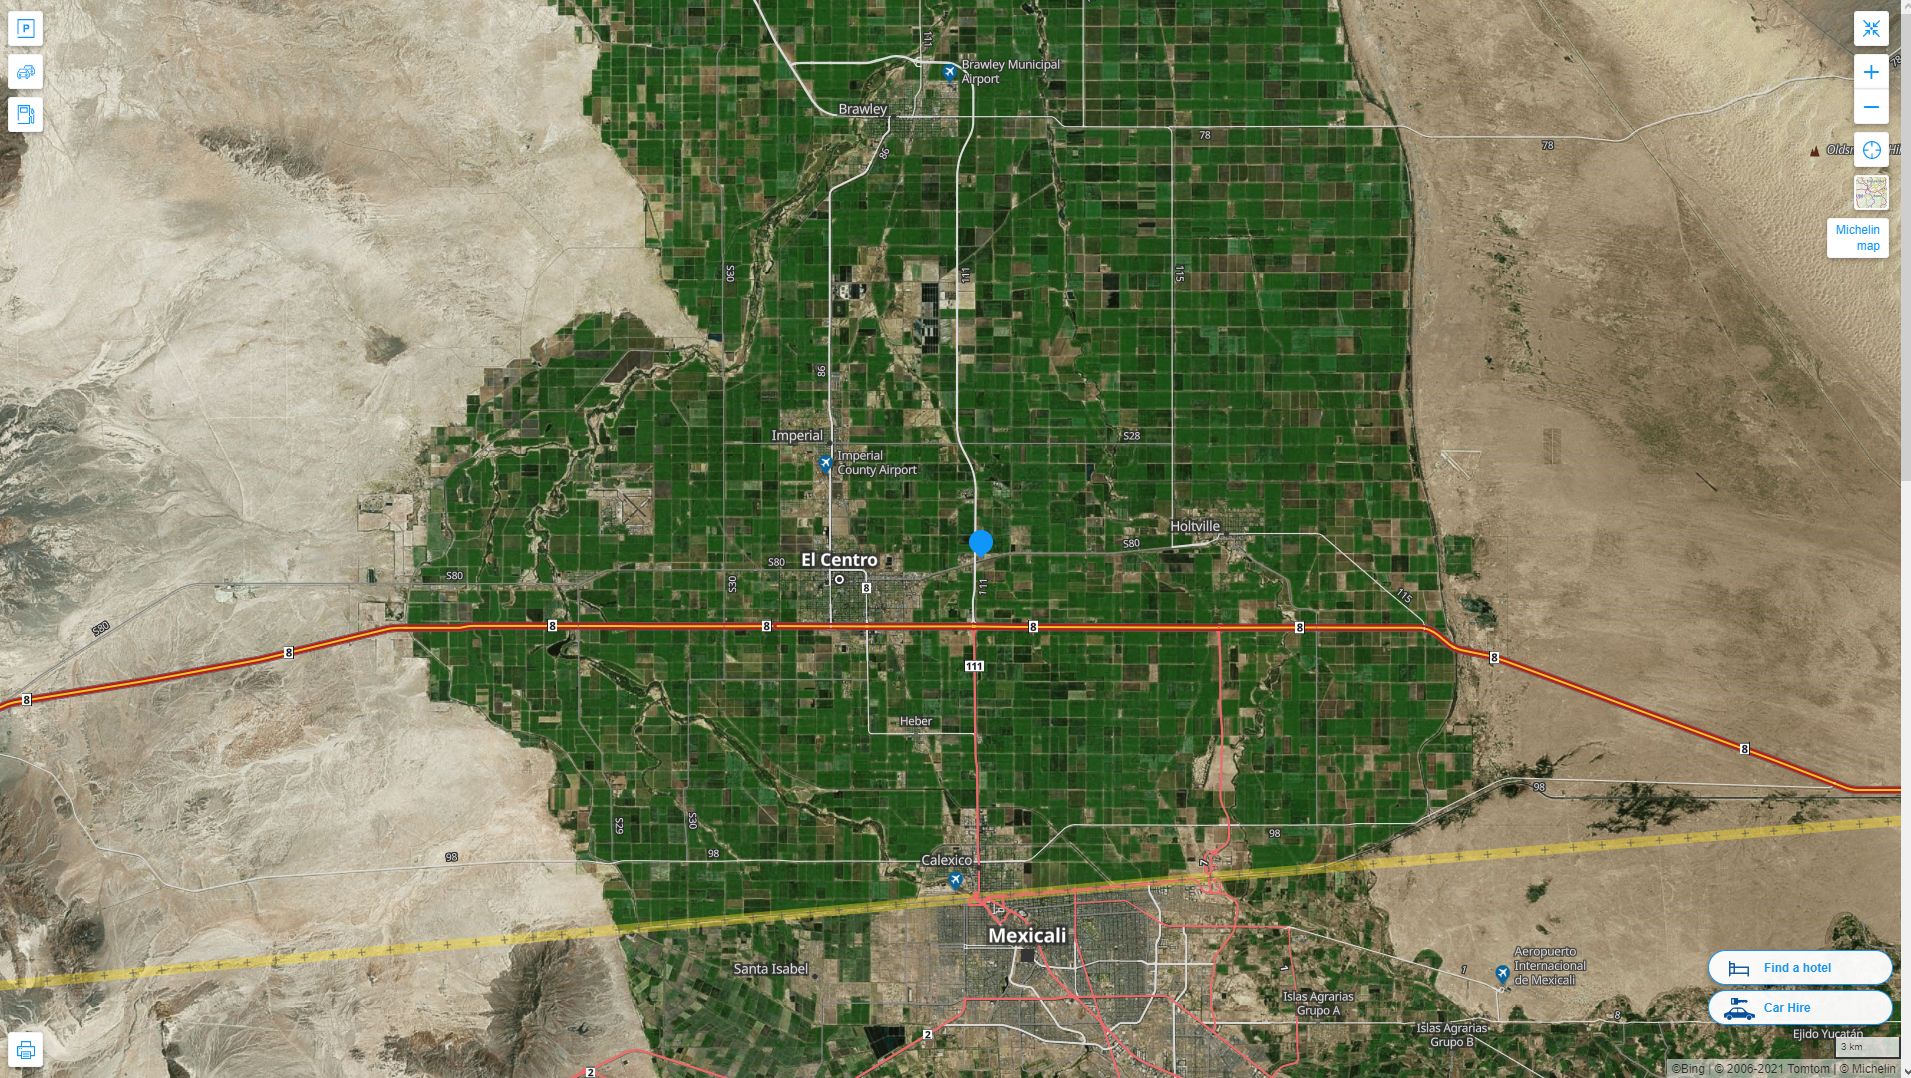 Anza California Highway and Road Map with Satellite View